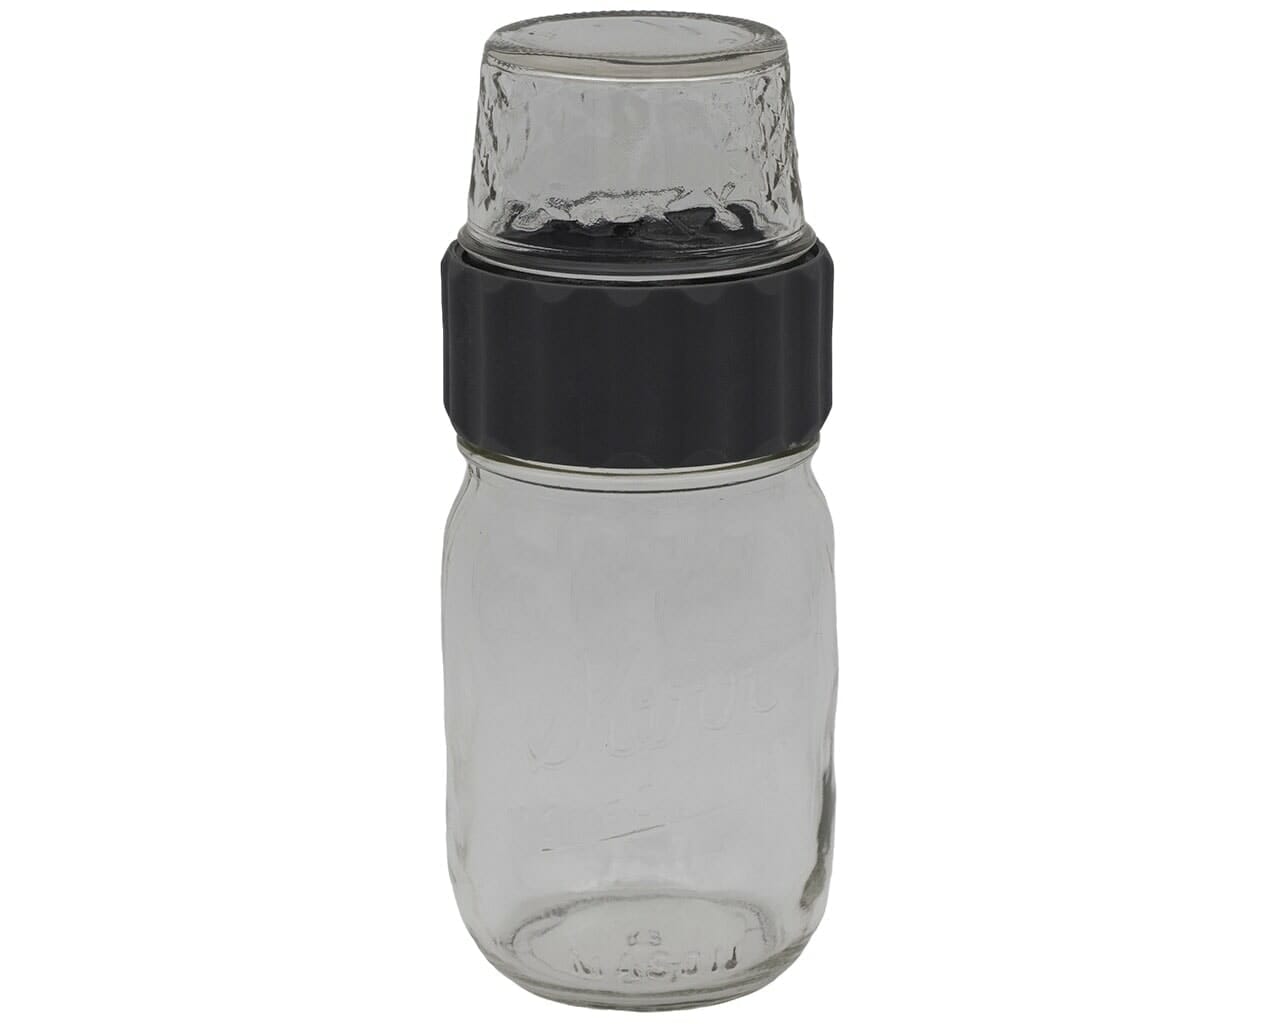 2-in-1-lid-connect-two-regular-mouth-mason-jars-charcoal-gray-silicone-seals-4oz-16oz-pint-ball-kerr-jars